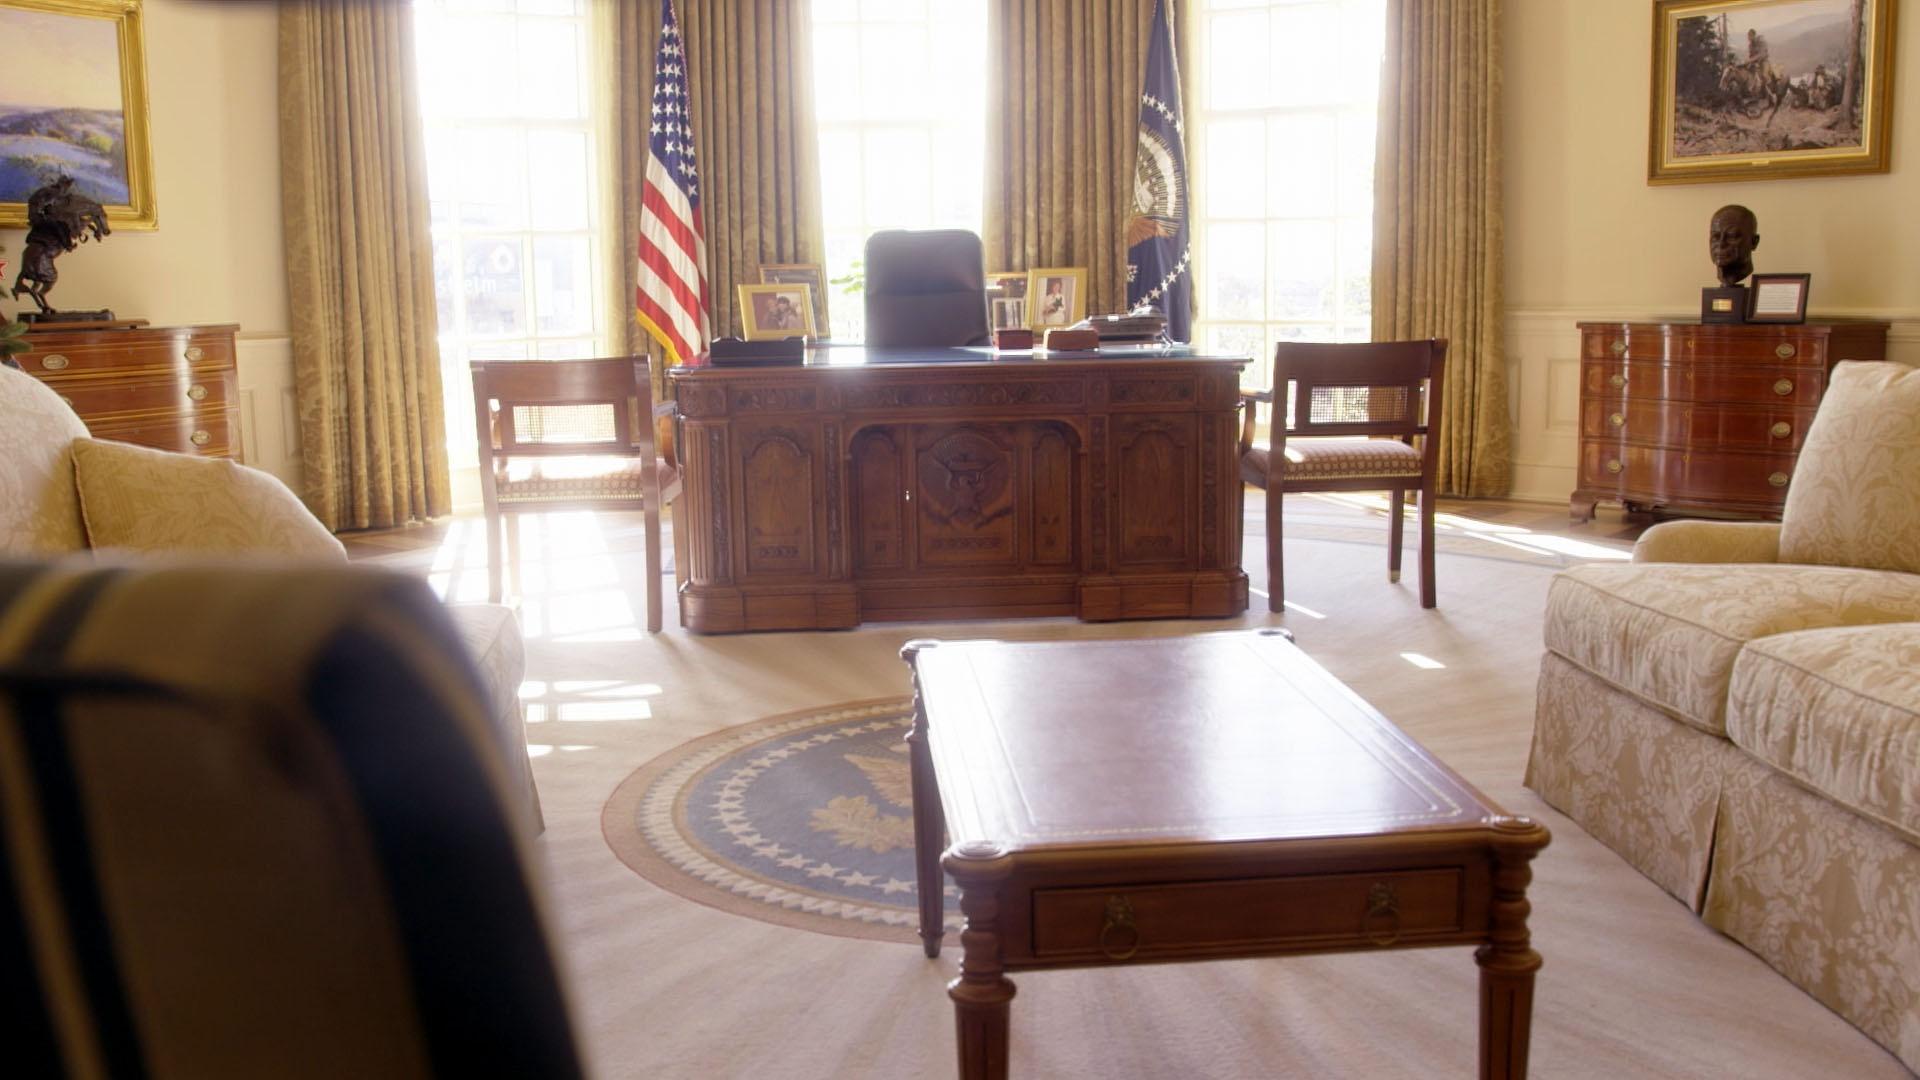 Wide shot of Resolute Desk with couches and side table in foreground.